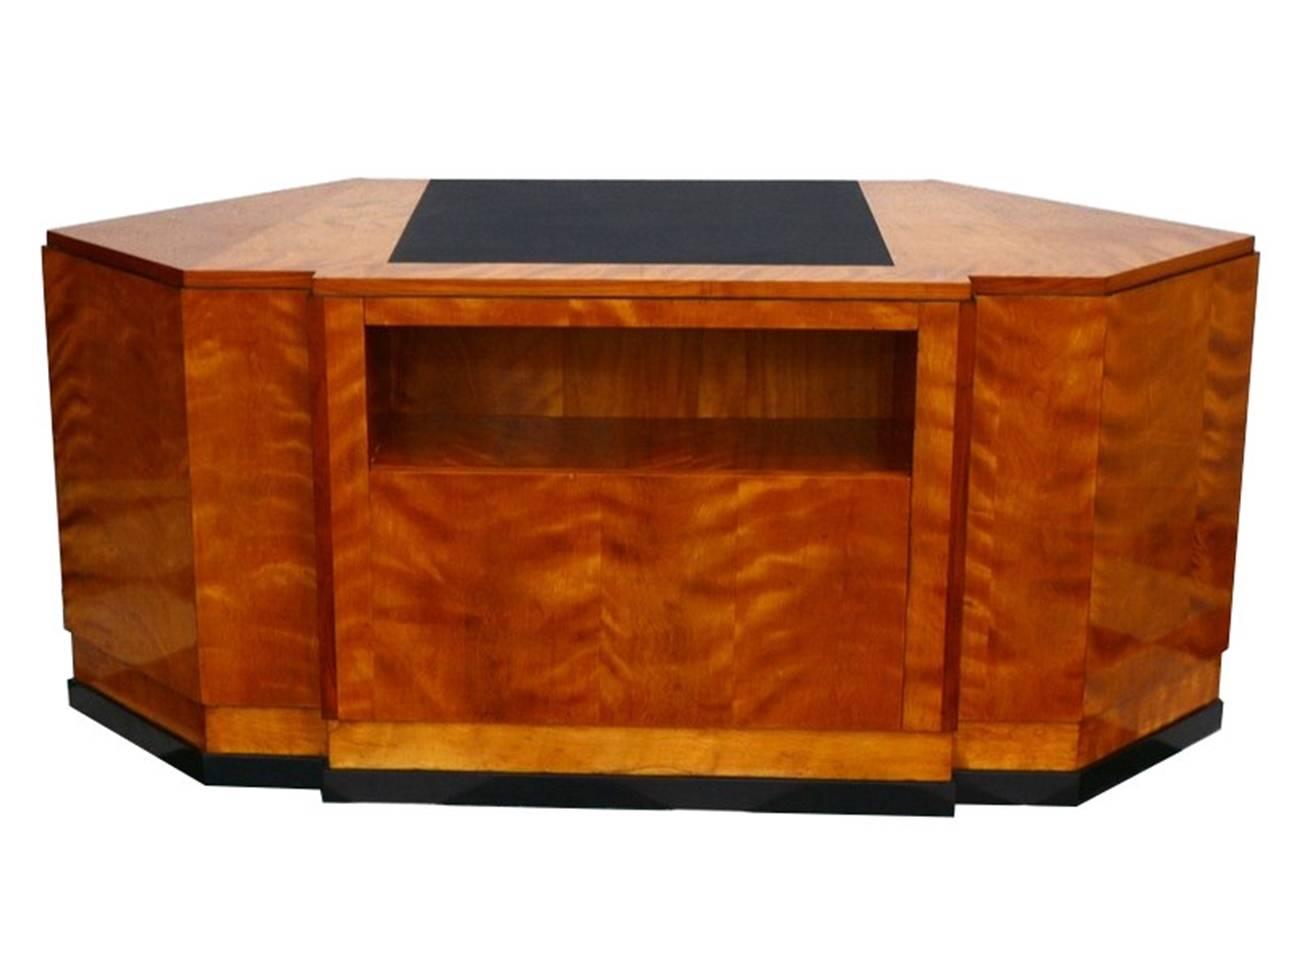 Hand-Crafted Hexagonal Art Deco Desk Made of Cherry and Mahogany Wood